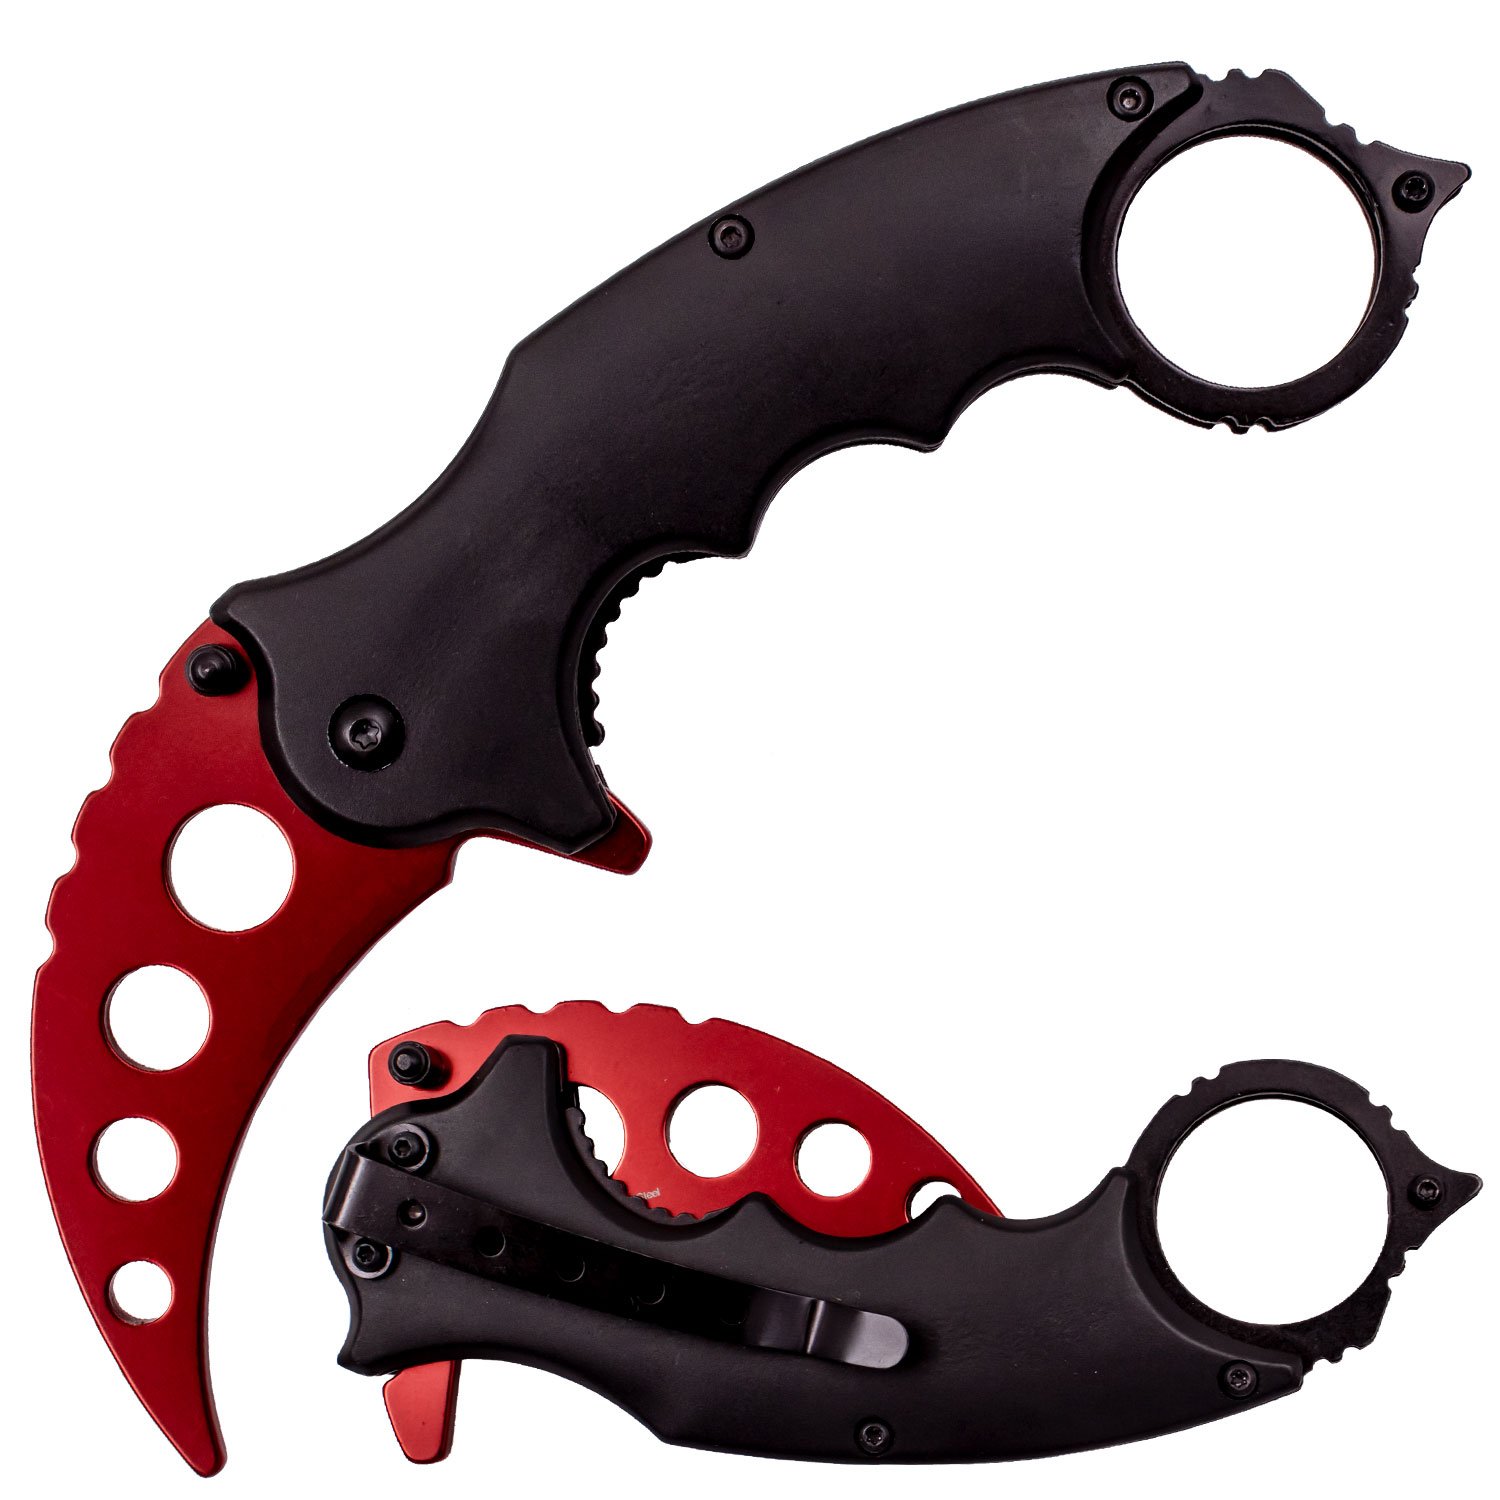 Tiger USA Spring Assisted Training Karambit Knife   Red and Black